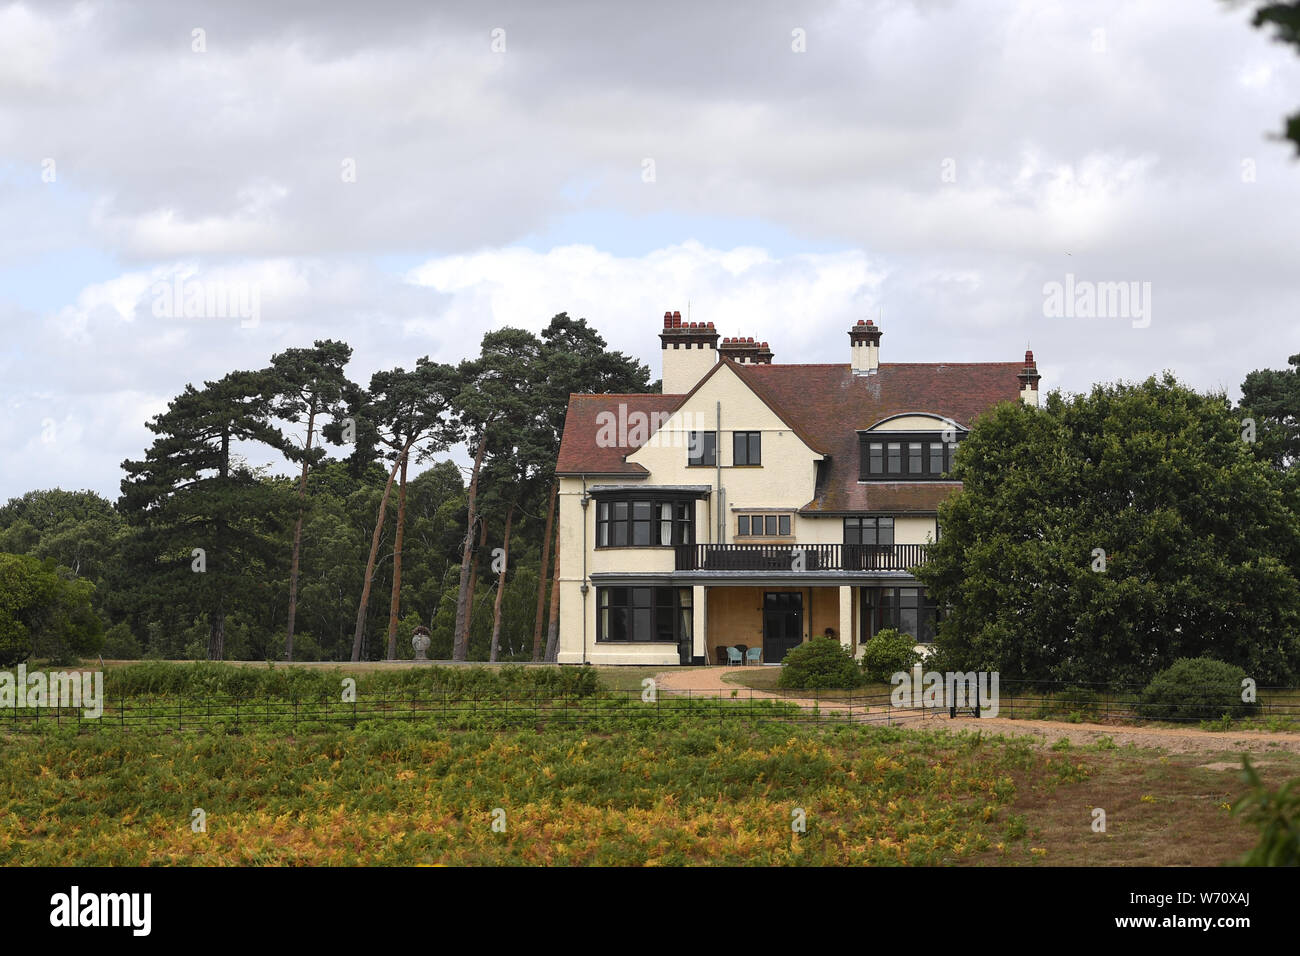 EMBARGOED TO 0001 MONDAY AUGUST 5 Tranmer House, the home of Edith Pretty who instigated the digs in 1939, now forms part of the new exhibition at the National Trust's Sutton Hoo site in Suffolk following a ??4m revamp. Stock Photo